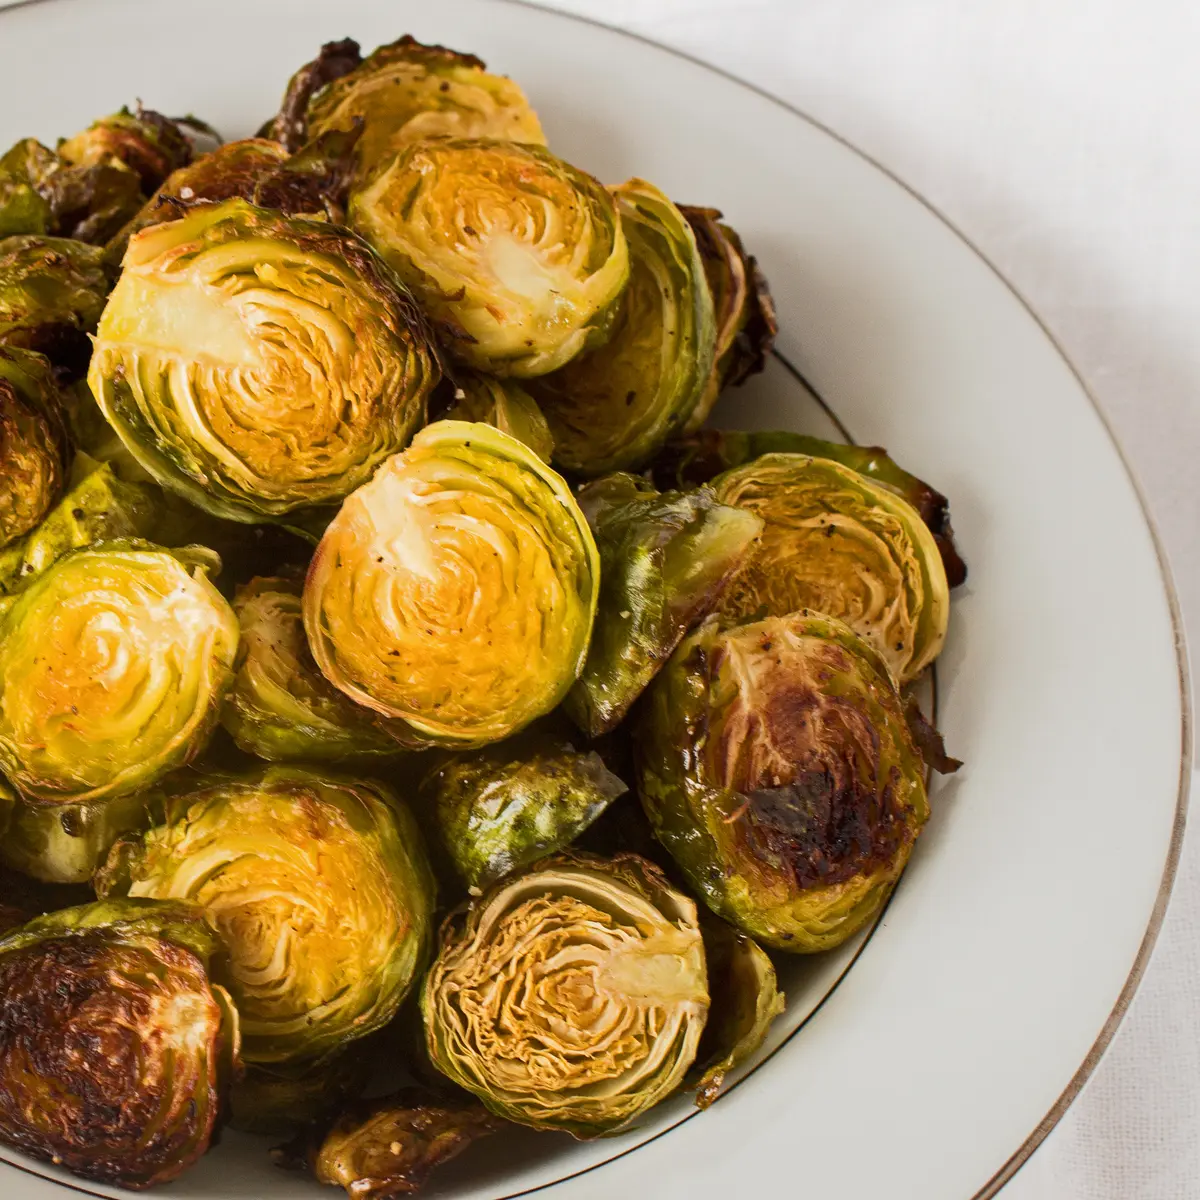 Roasted brussel sprouts showing golden caramelized color in a white serving bowl on white background